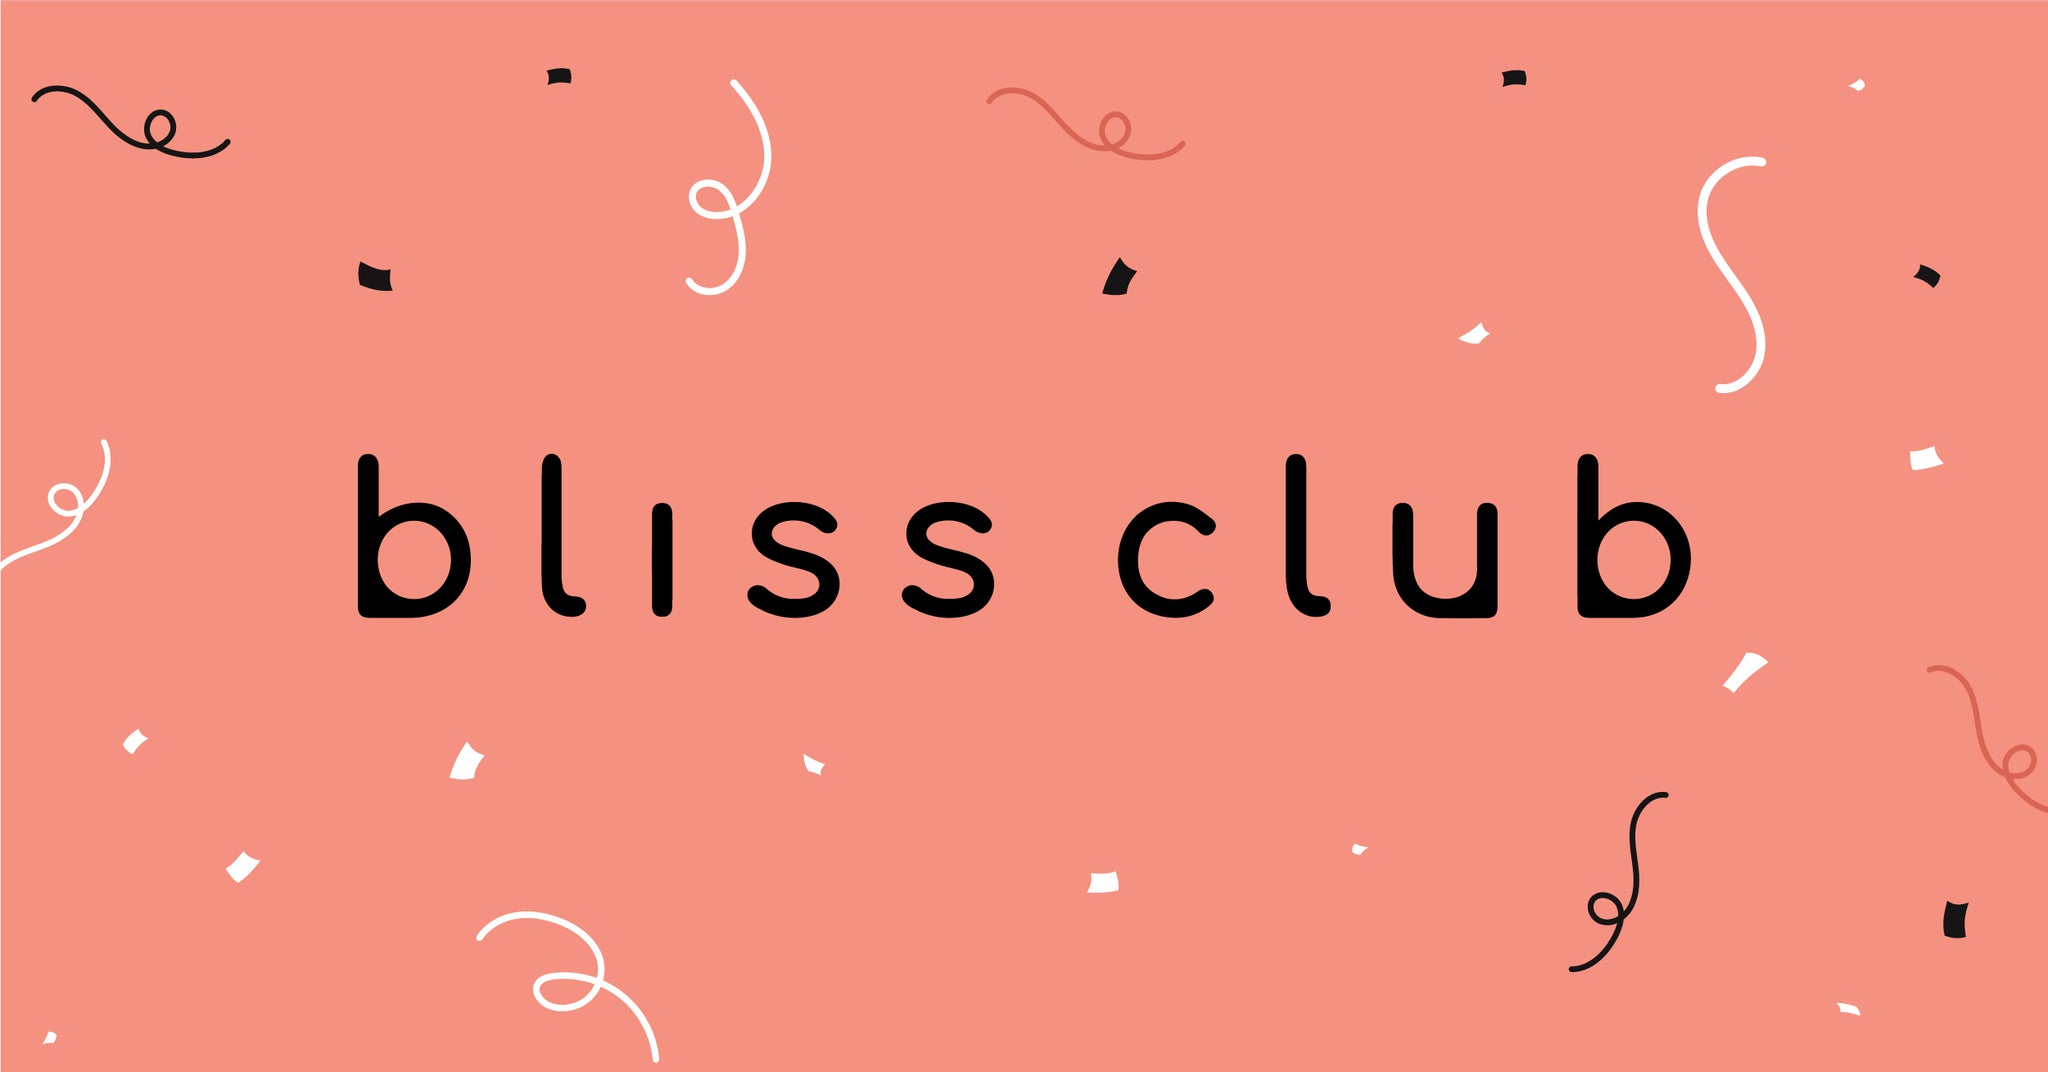 BlissClub is one of the youngest and only activelife wear brands